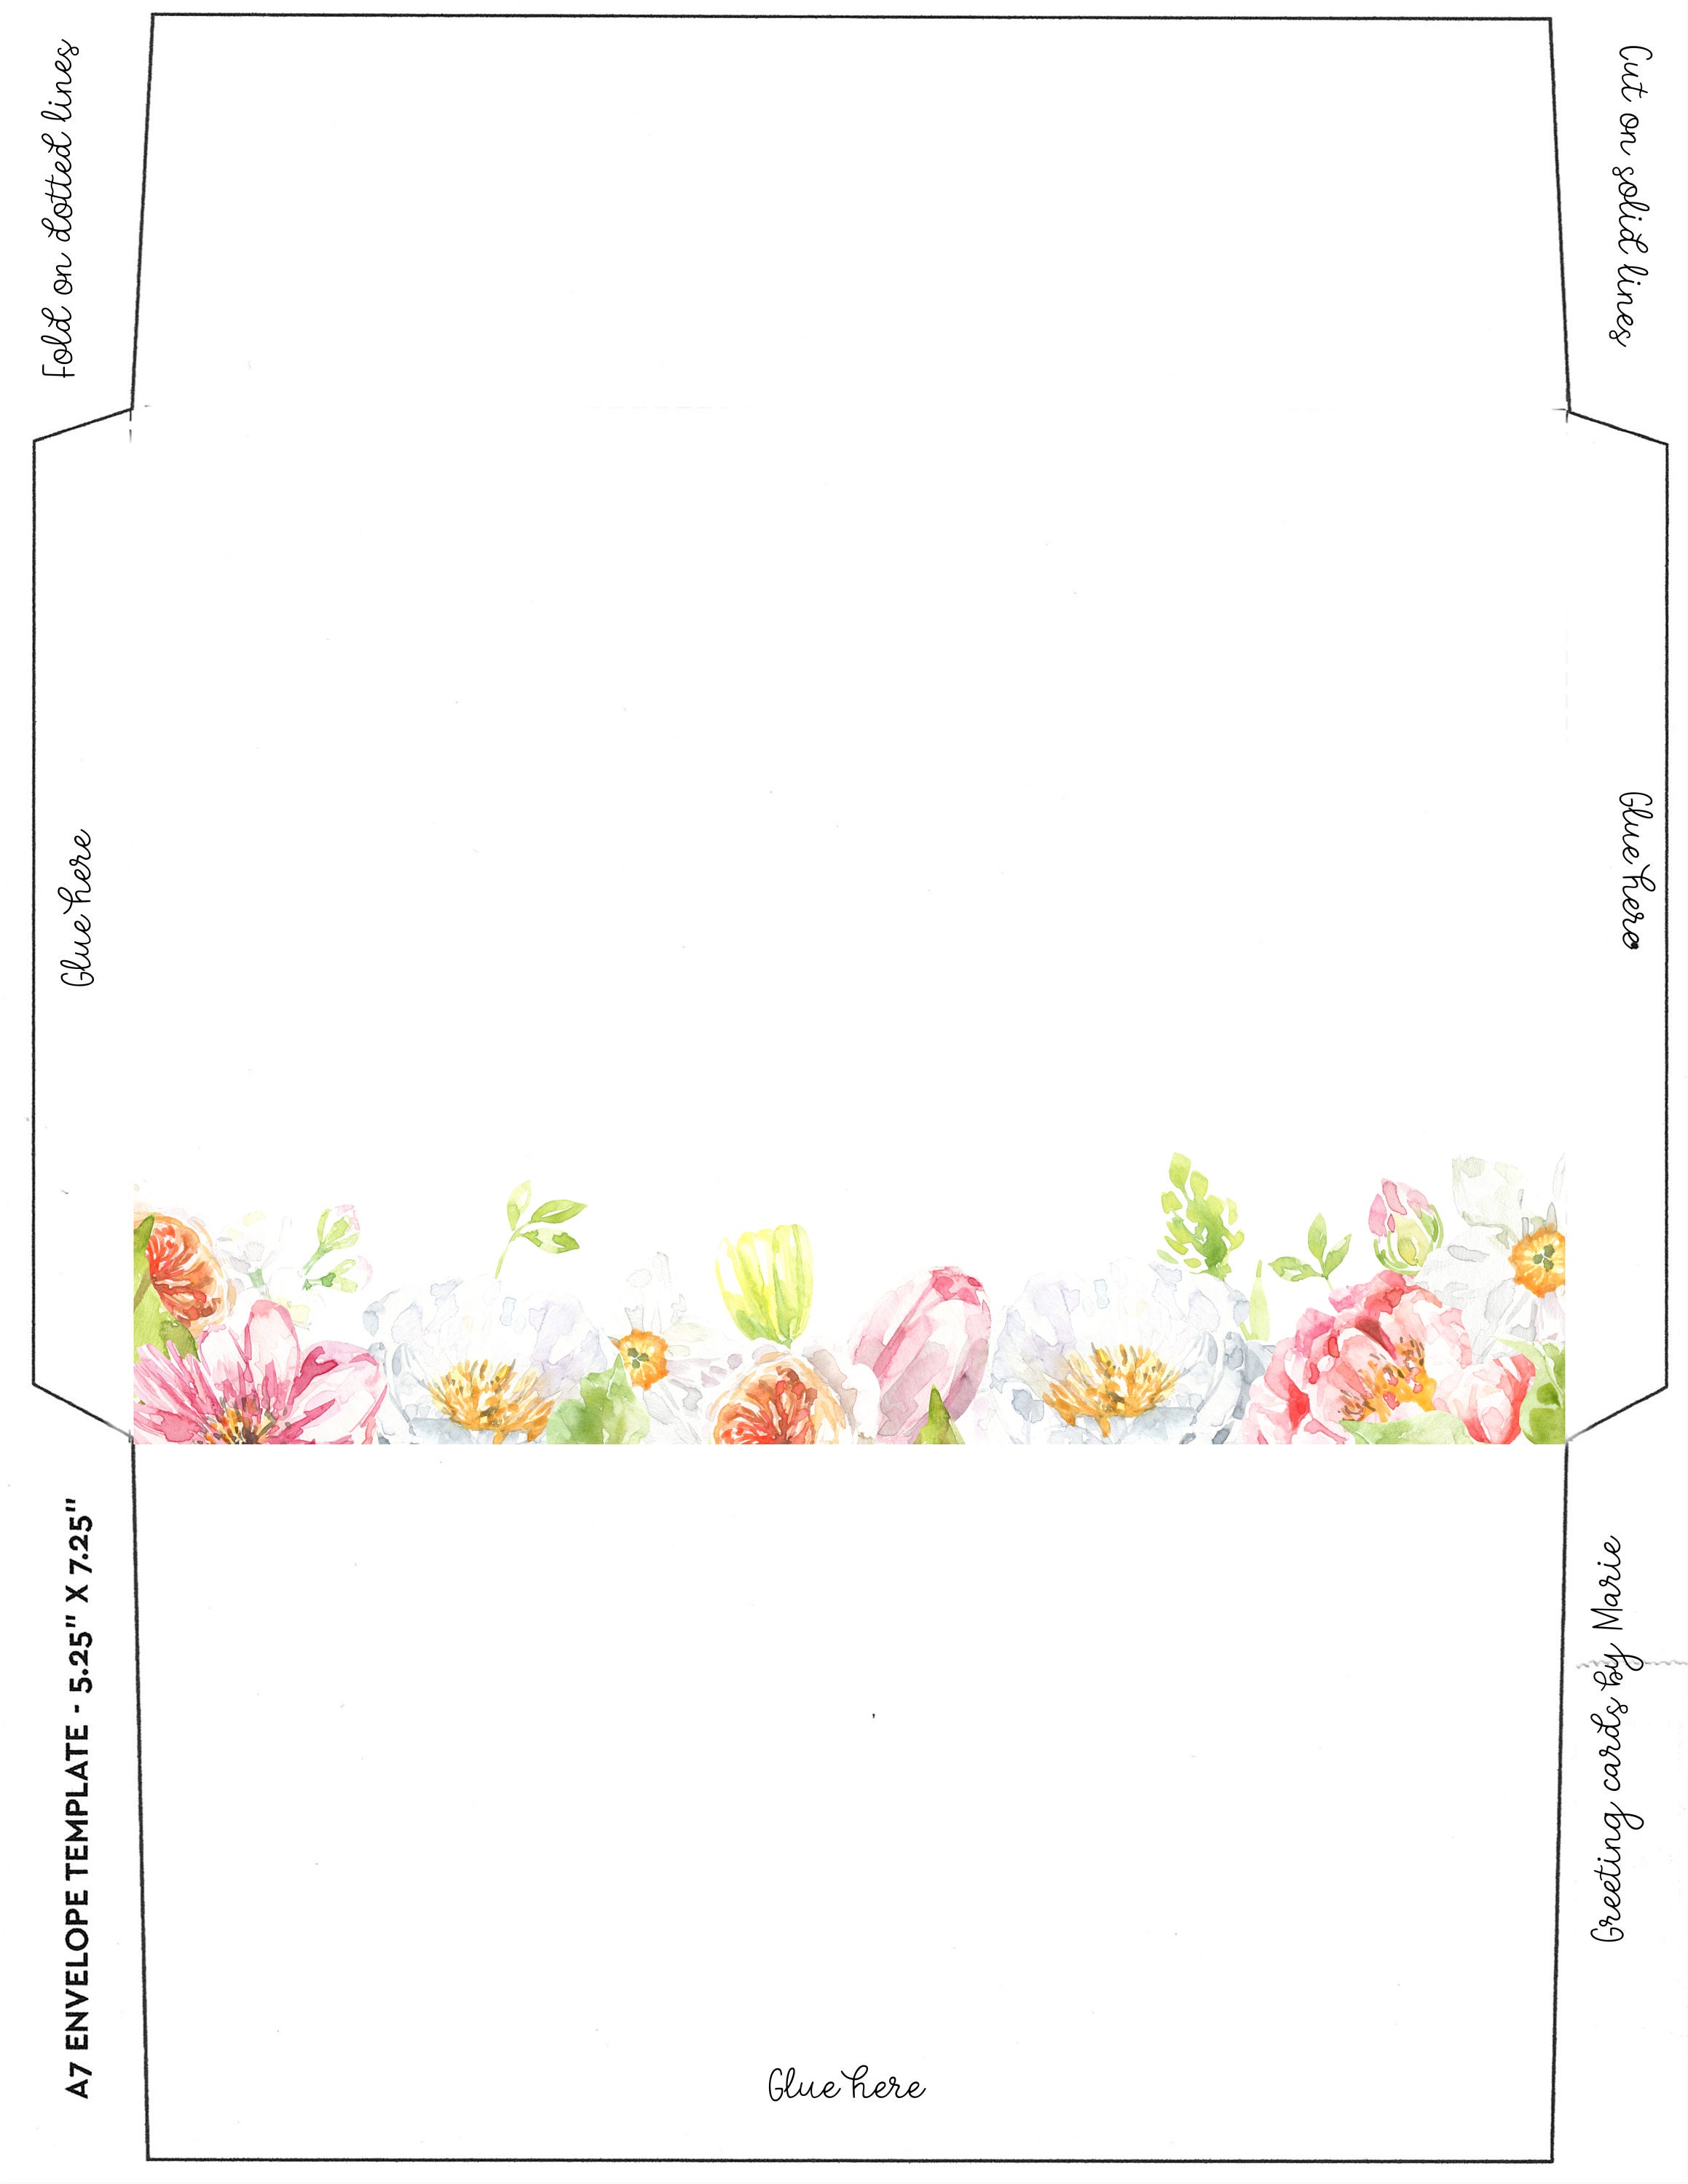 A7 Envelopes for 5x7 Cards Pack of 50 or Any Amount via Reserved